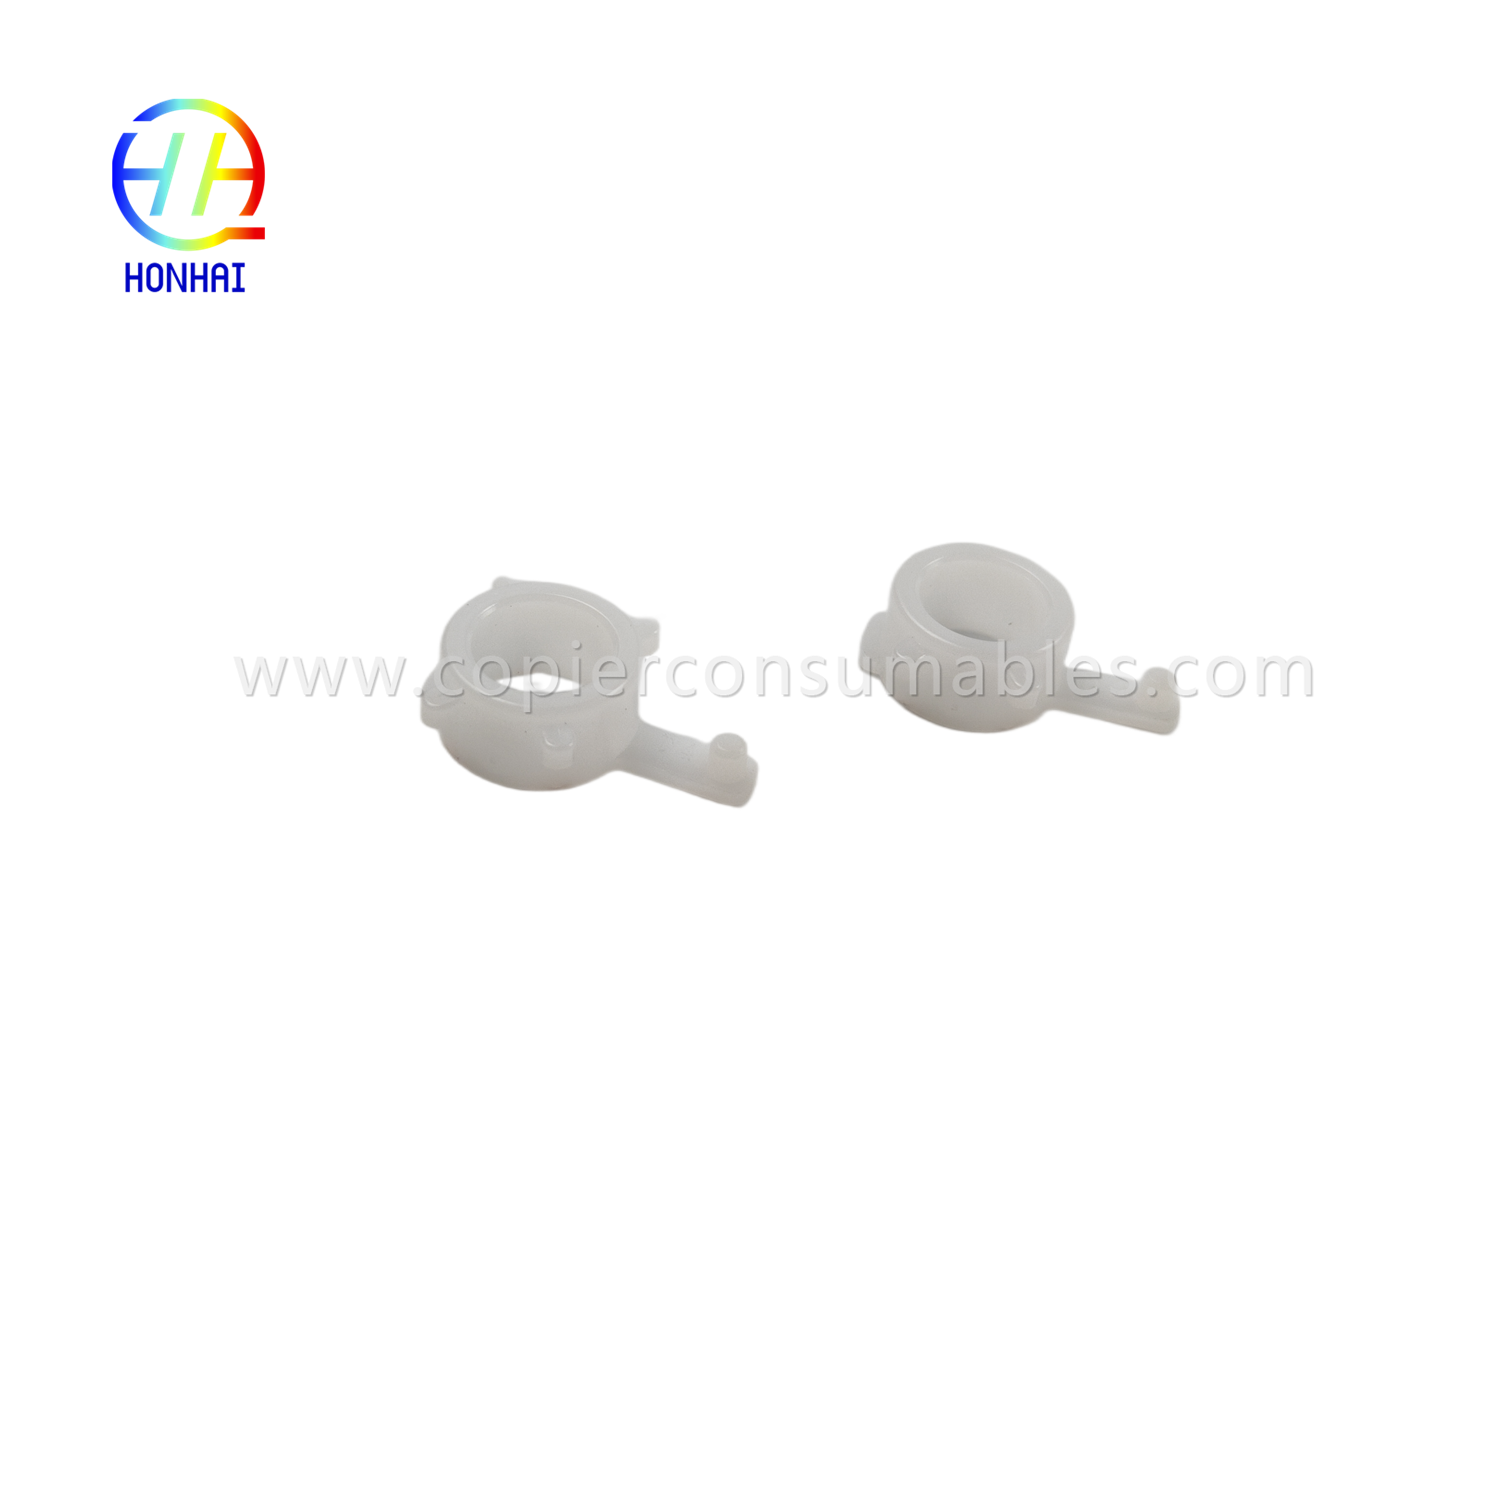 https://www.copierconsumables.com/delivery-roller-busshing-for-hp-2035-2055-2015-1320-rc2-6237-000-rl2-6229-oem-product/